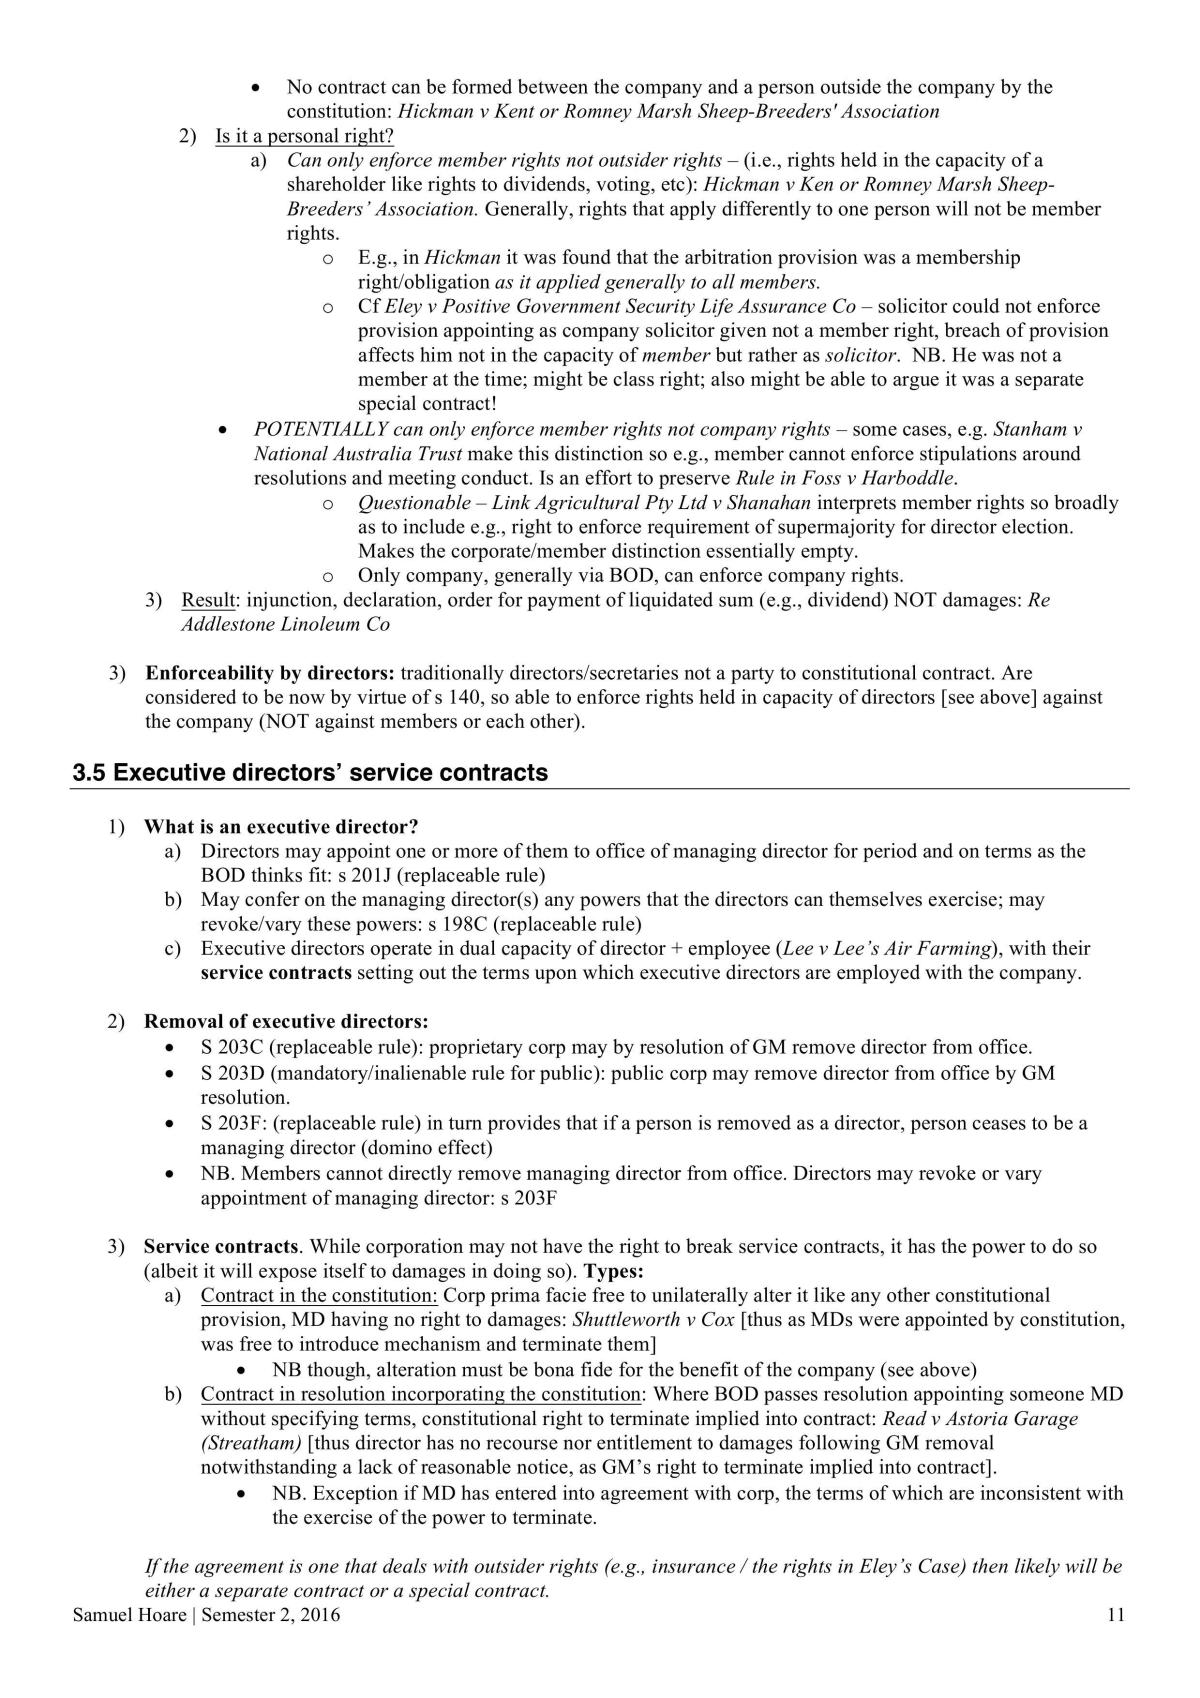 LAWS2014 Course Notes - Page 11